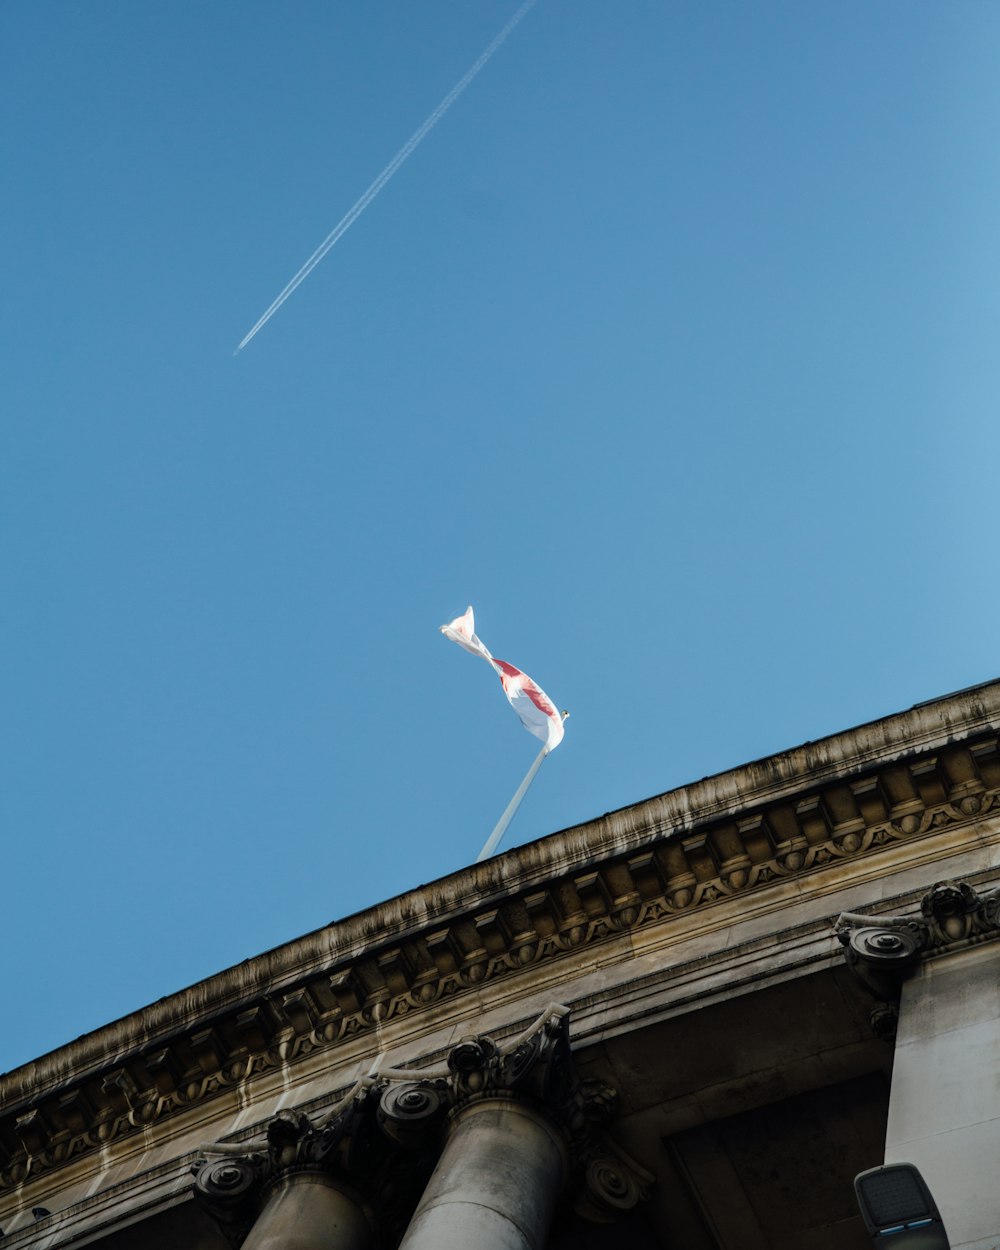 a kite flying high in the sky above a building